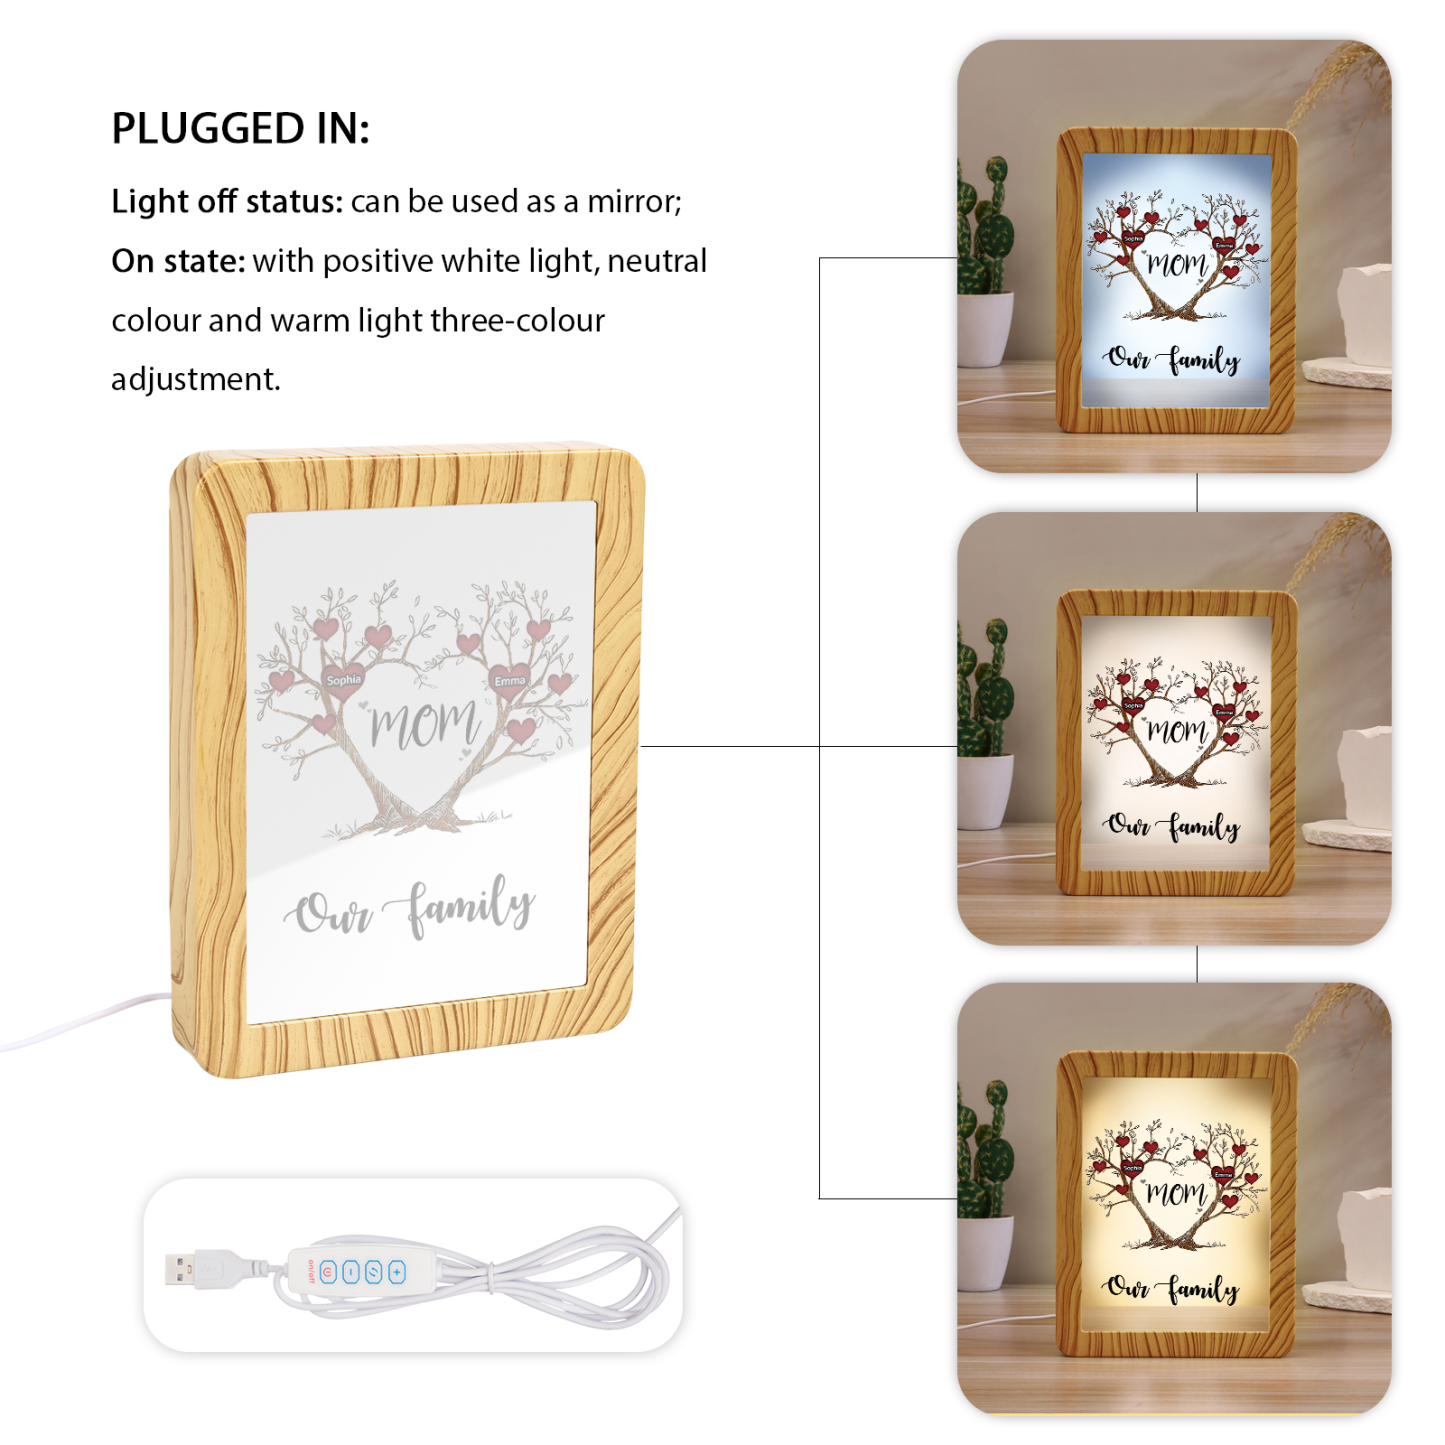 2 Names - Personalized Home Mirror Photo Frame Night Light Insert/Rechargeable Custom Text LED Night Light Gift for Mom